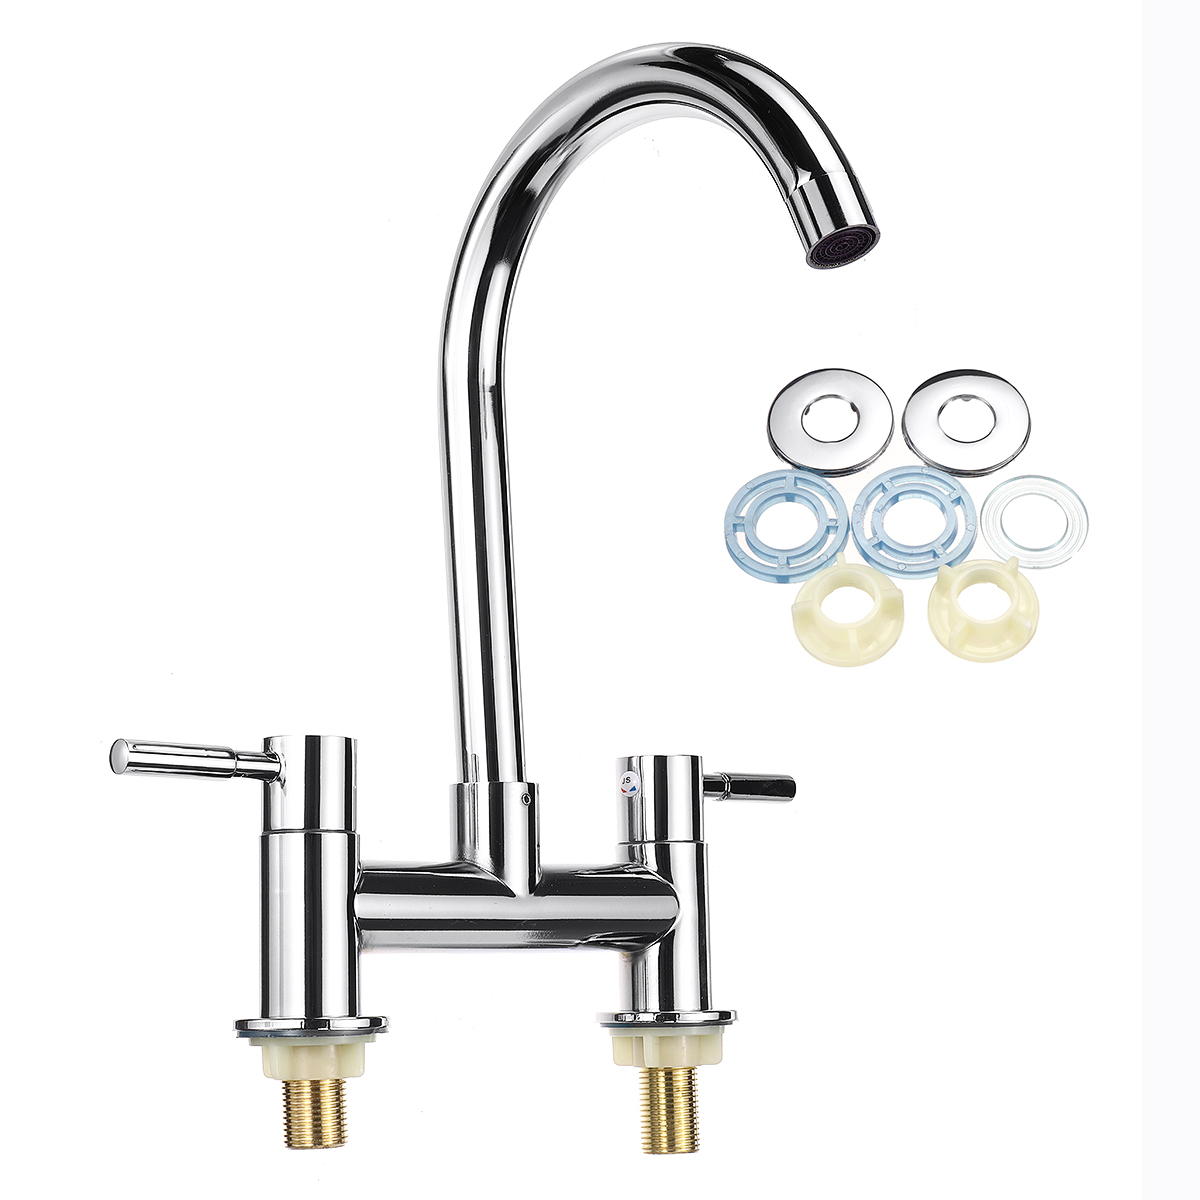 Kitchen Sink Faucet Hot Cold Mixer Tap Double Handle Double Hole Spout Finish Brushed Swivel Spray 360 Swivel